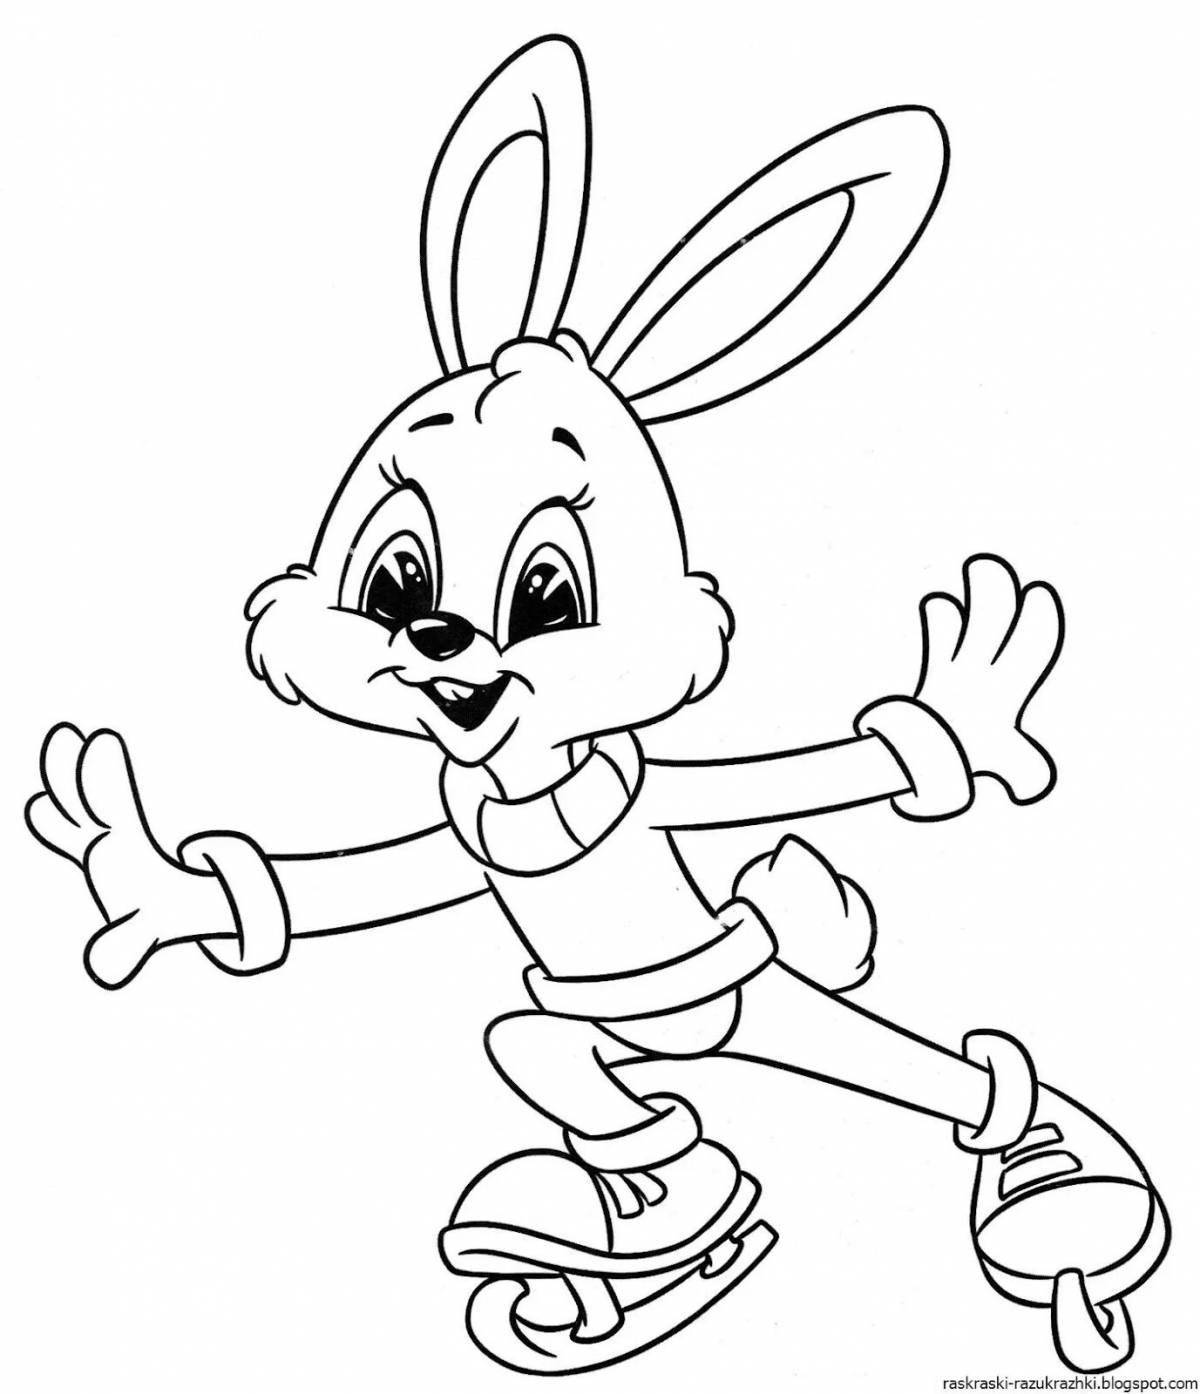 Coloring book happy rabbit for kids